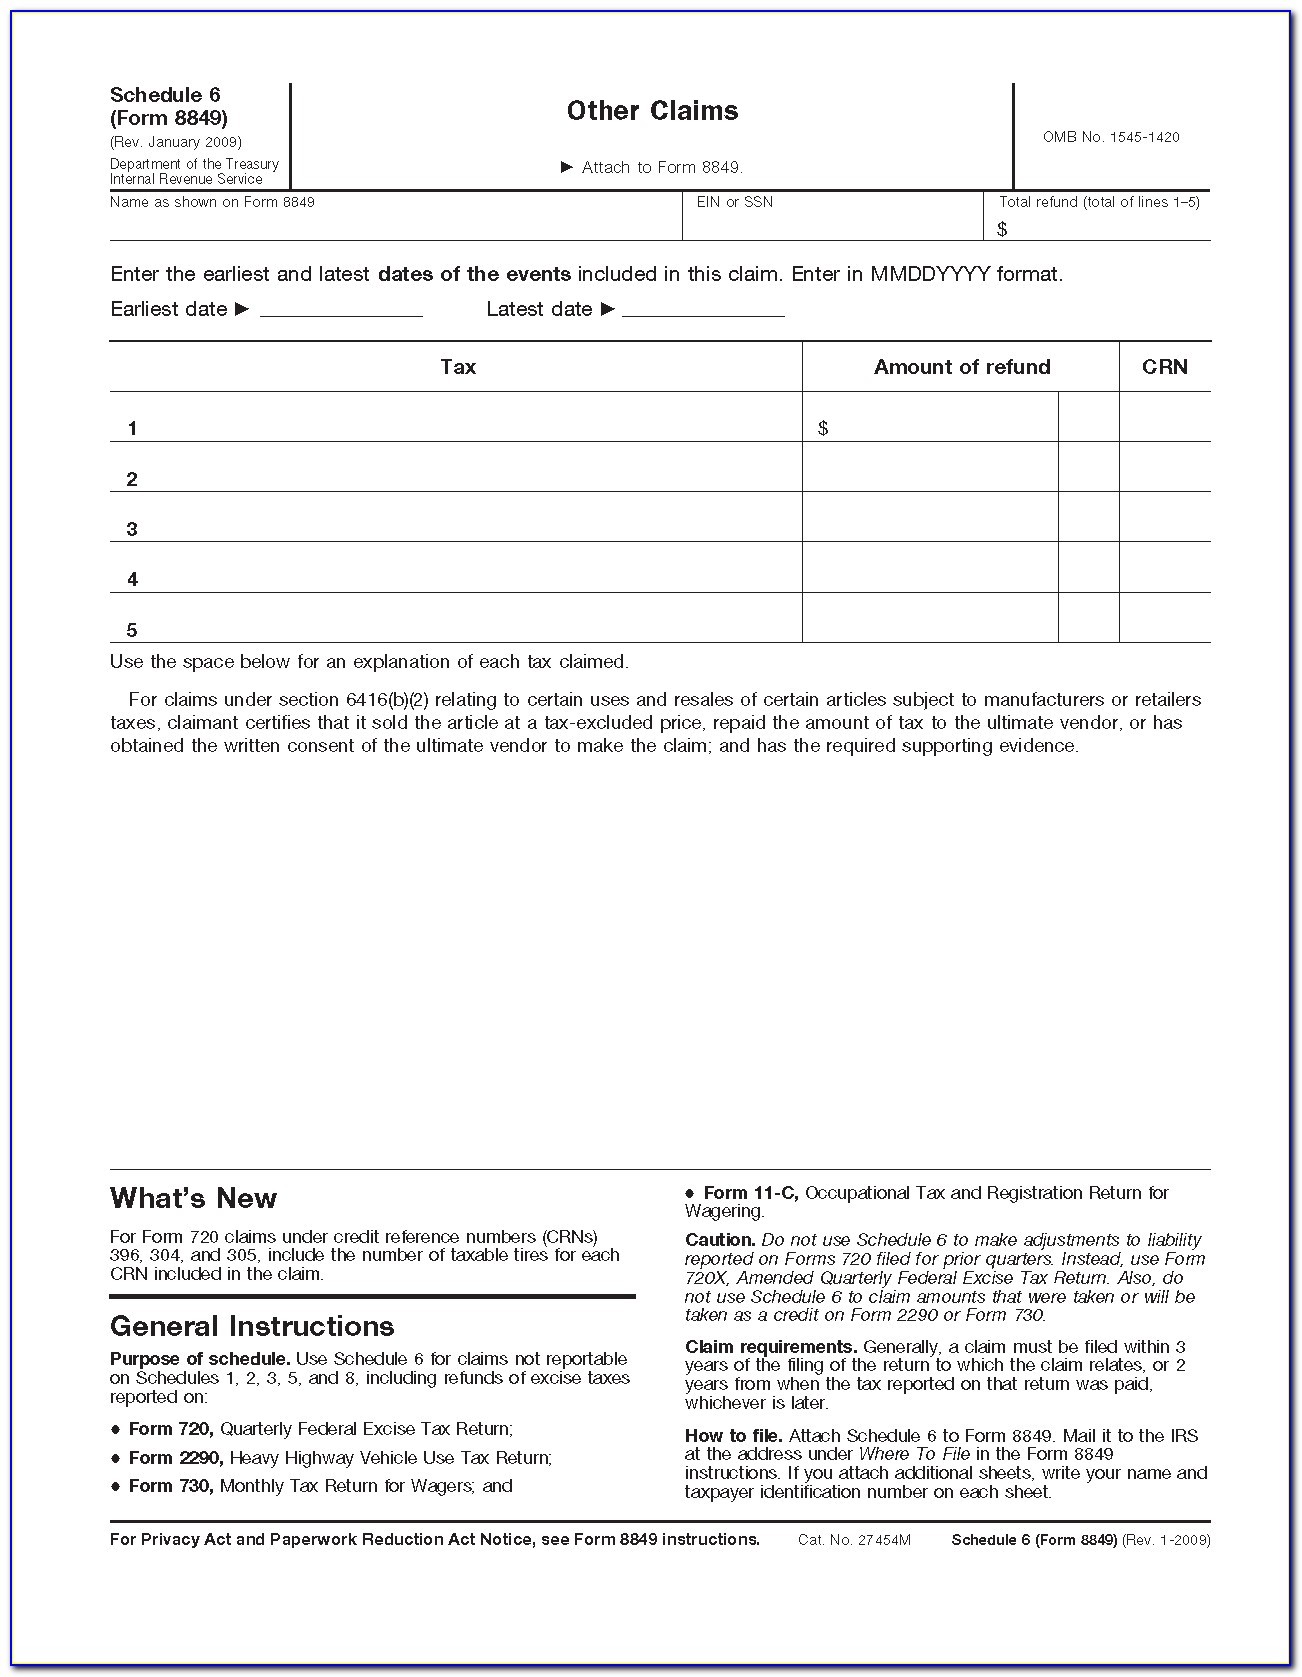 How To Fill Form 2290